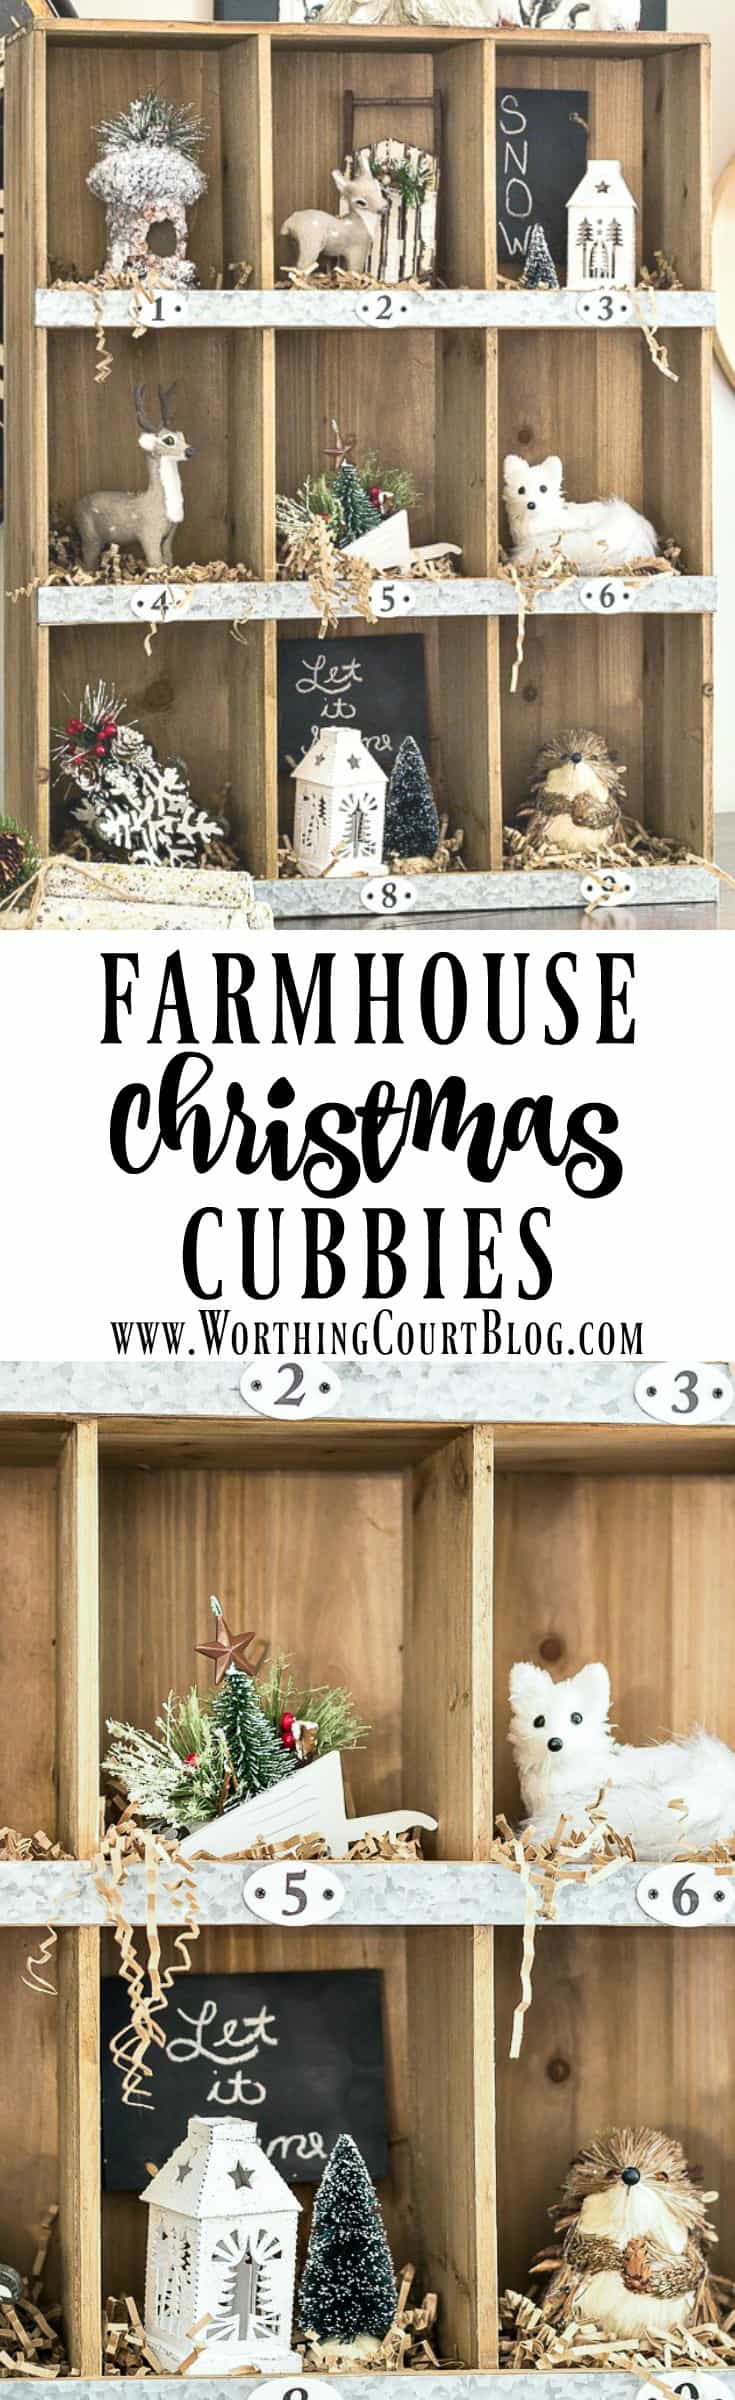 Rustic farmhouse style cubbies filled with tree ornaments for Christmas